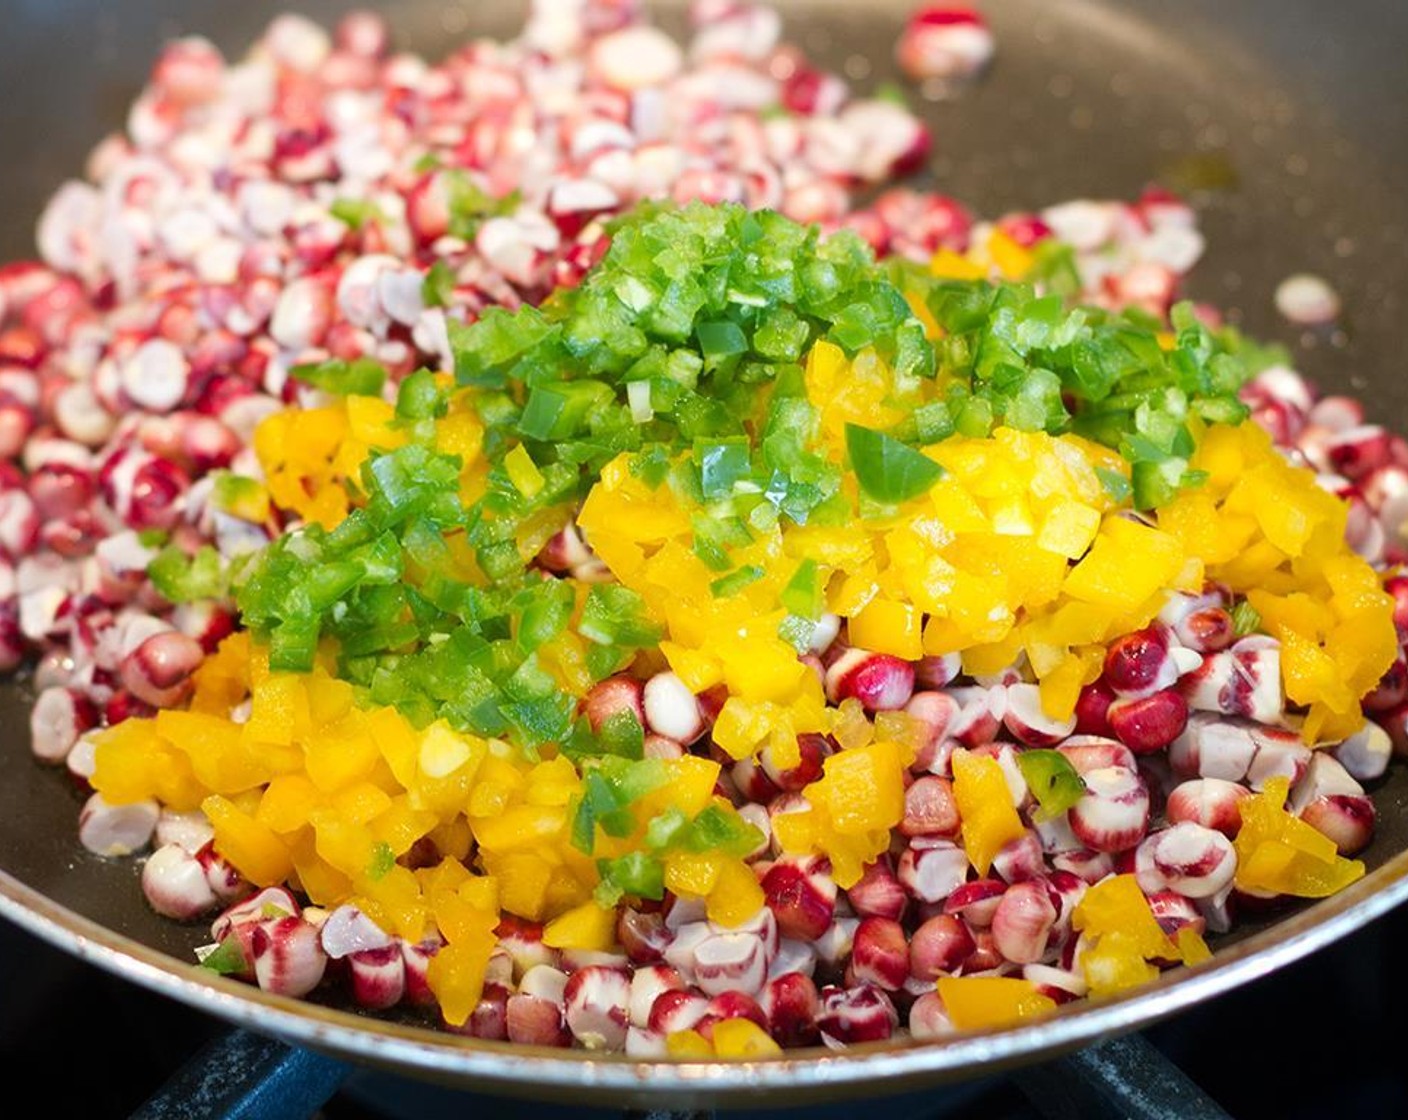 step 7 Once melted, add yellow bell pepper (1/4 cup), jalapeno pepper (1) and yellow corn kernels (2 cups) stirring occasionally, and cook for 10 minutes. Remove the skillet from the heat, mix in the scallion (3), and set aside to cool down.